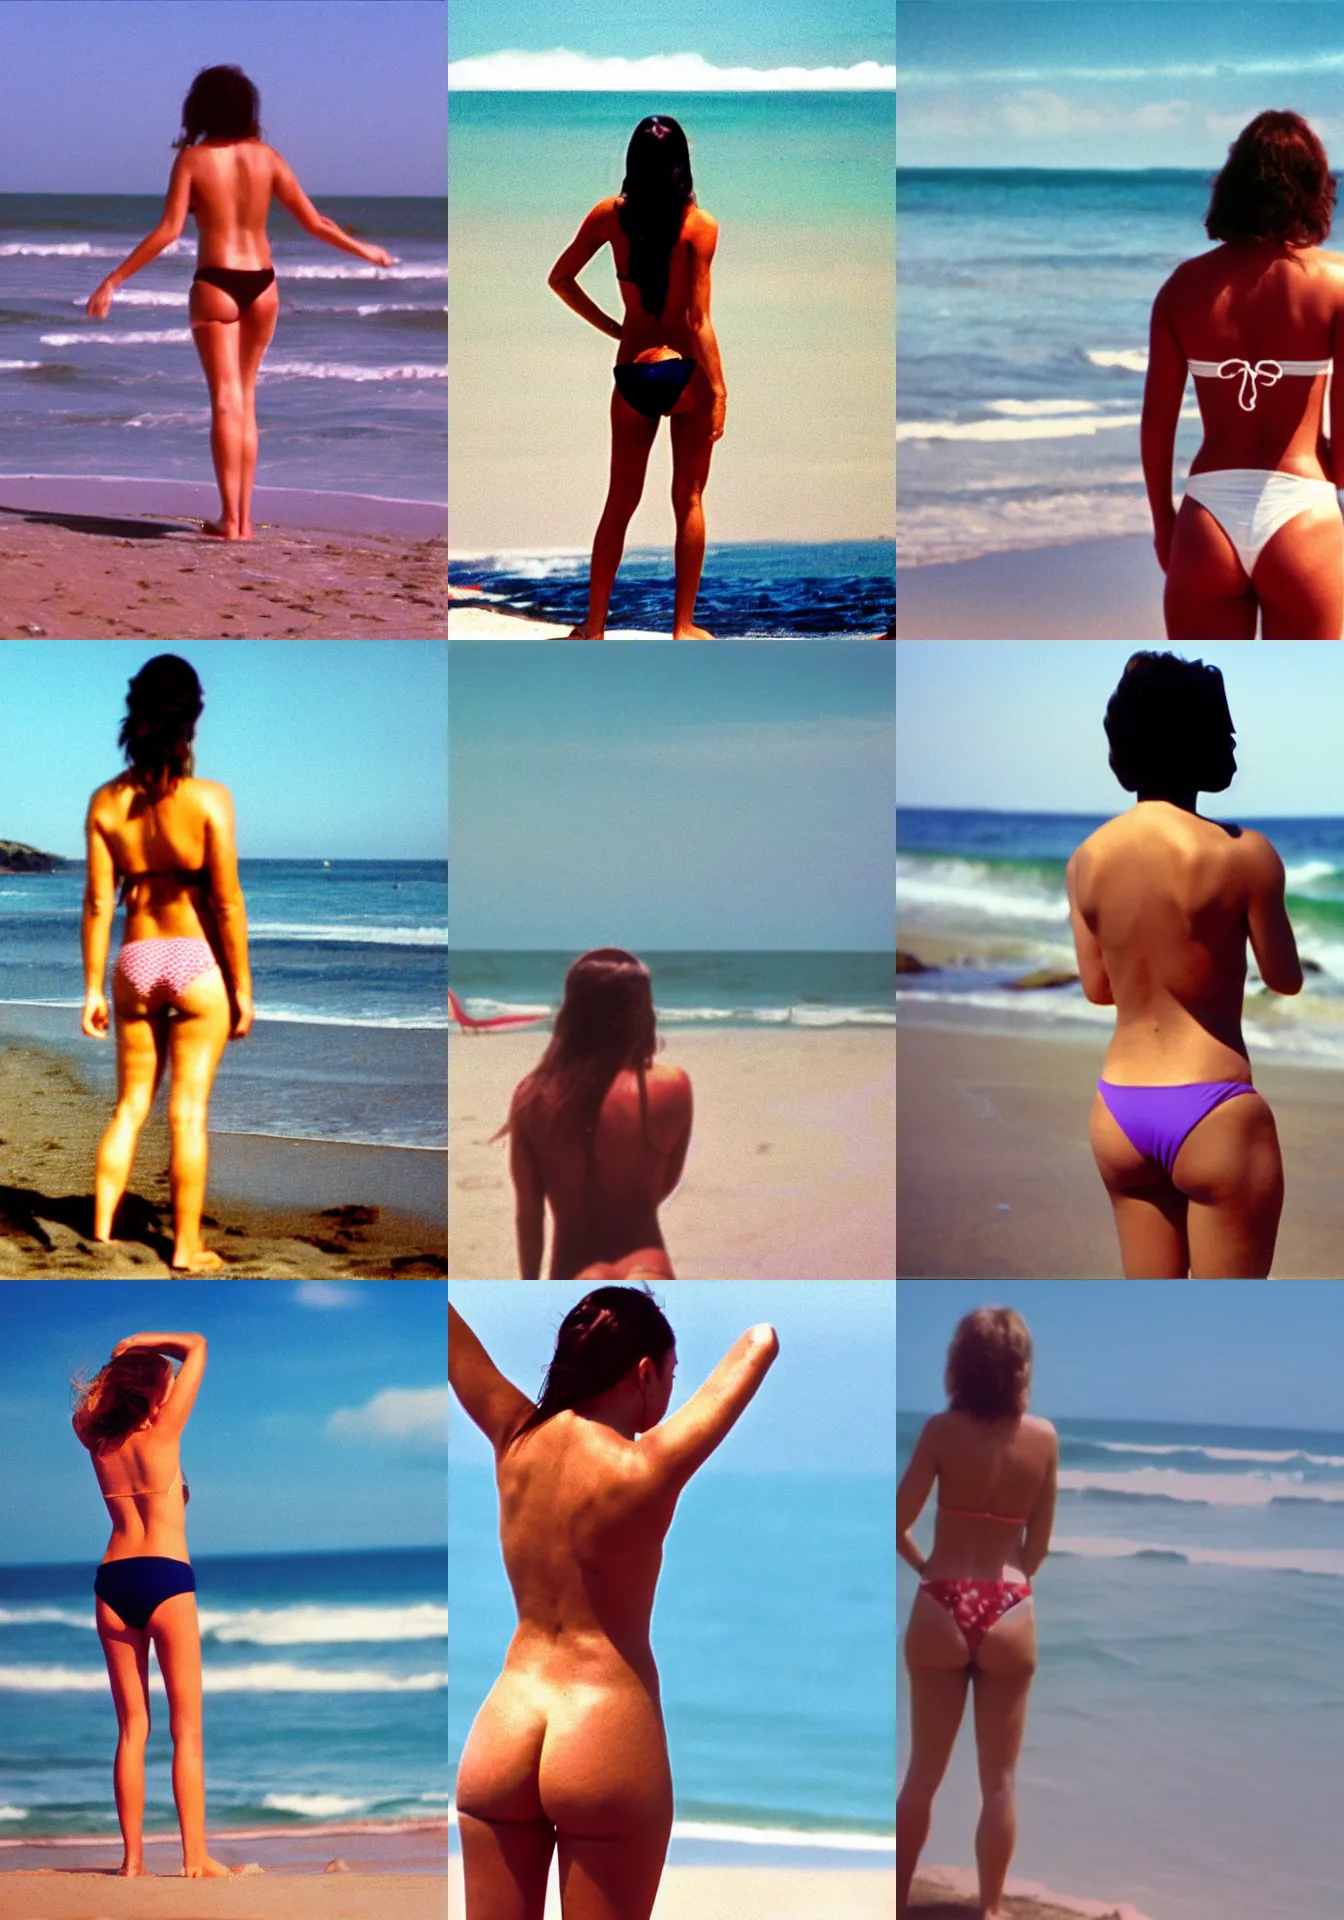 Prompt: home video footage, view from behind ; a woman in bikini standing on the beach ; daylight, summer, color vhs picture quality